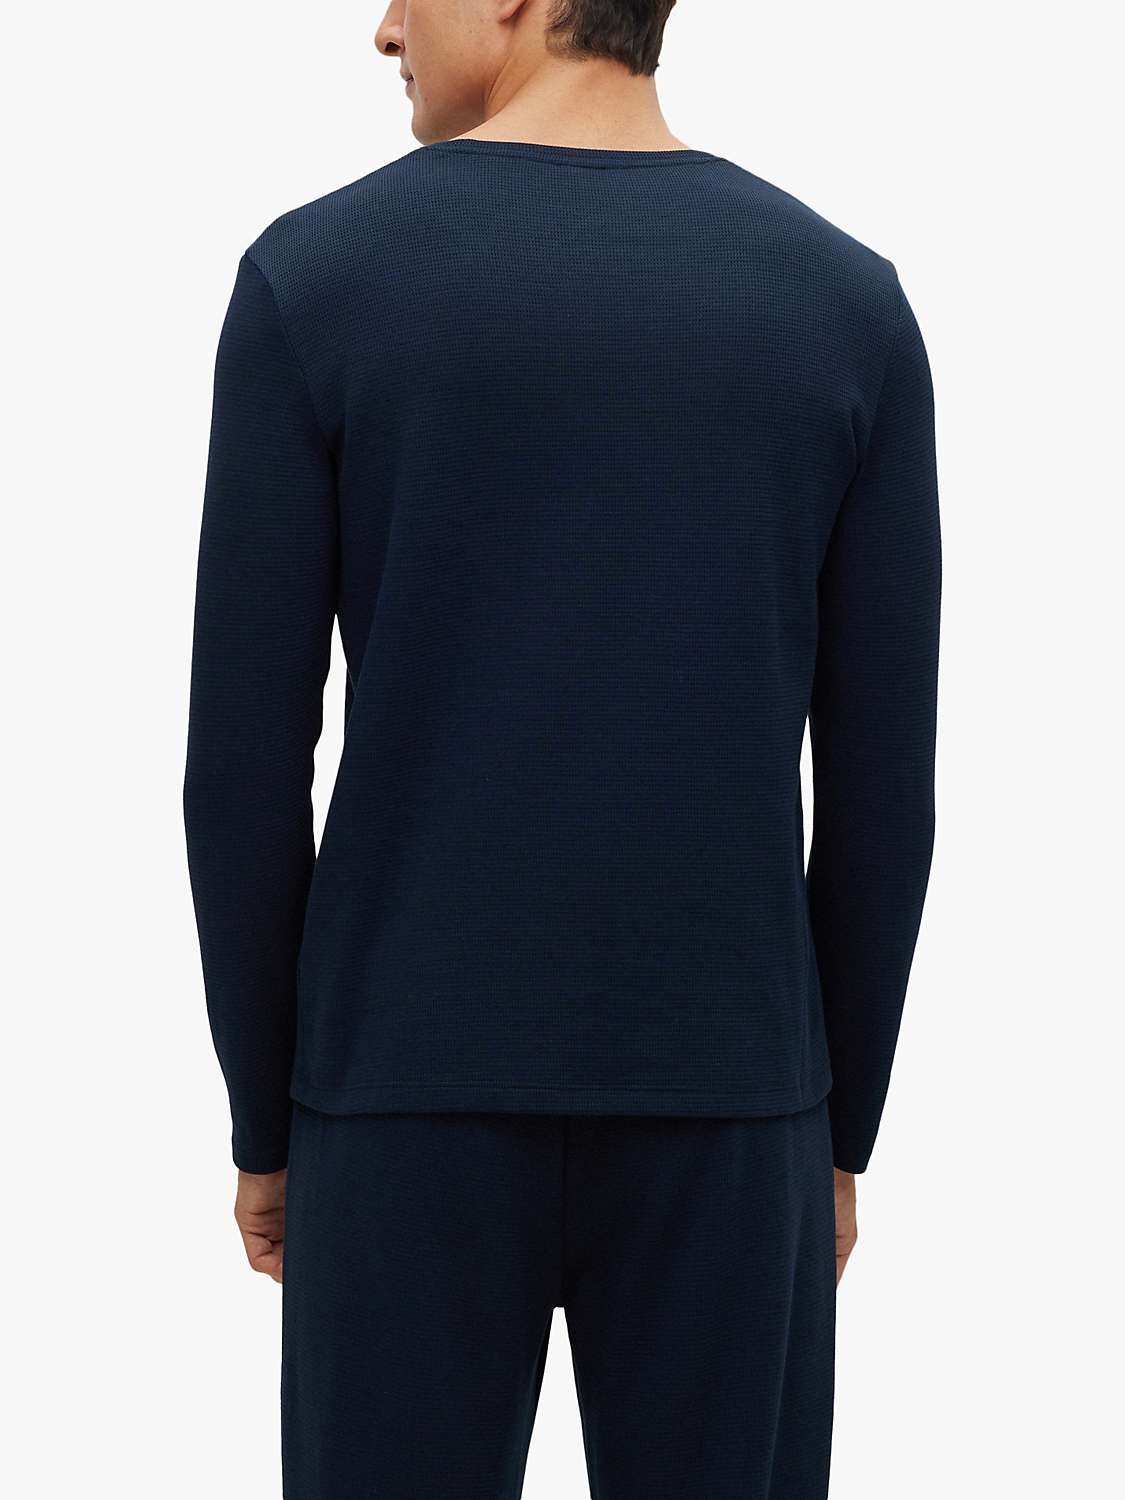 Buy BOSS Waffle Long Sleeve Lounge Top Online at johnlewis.com